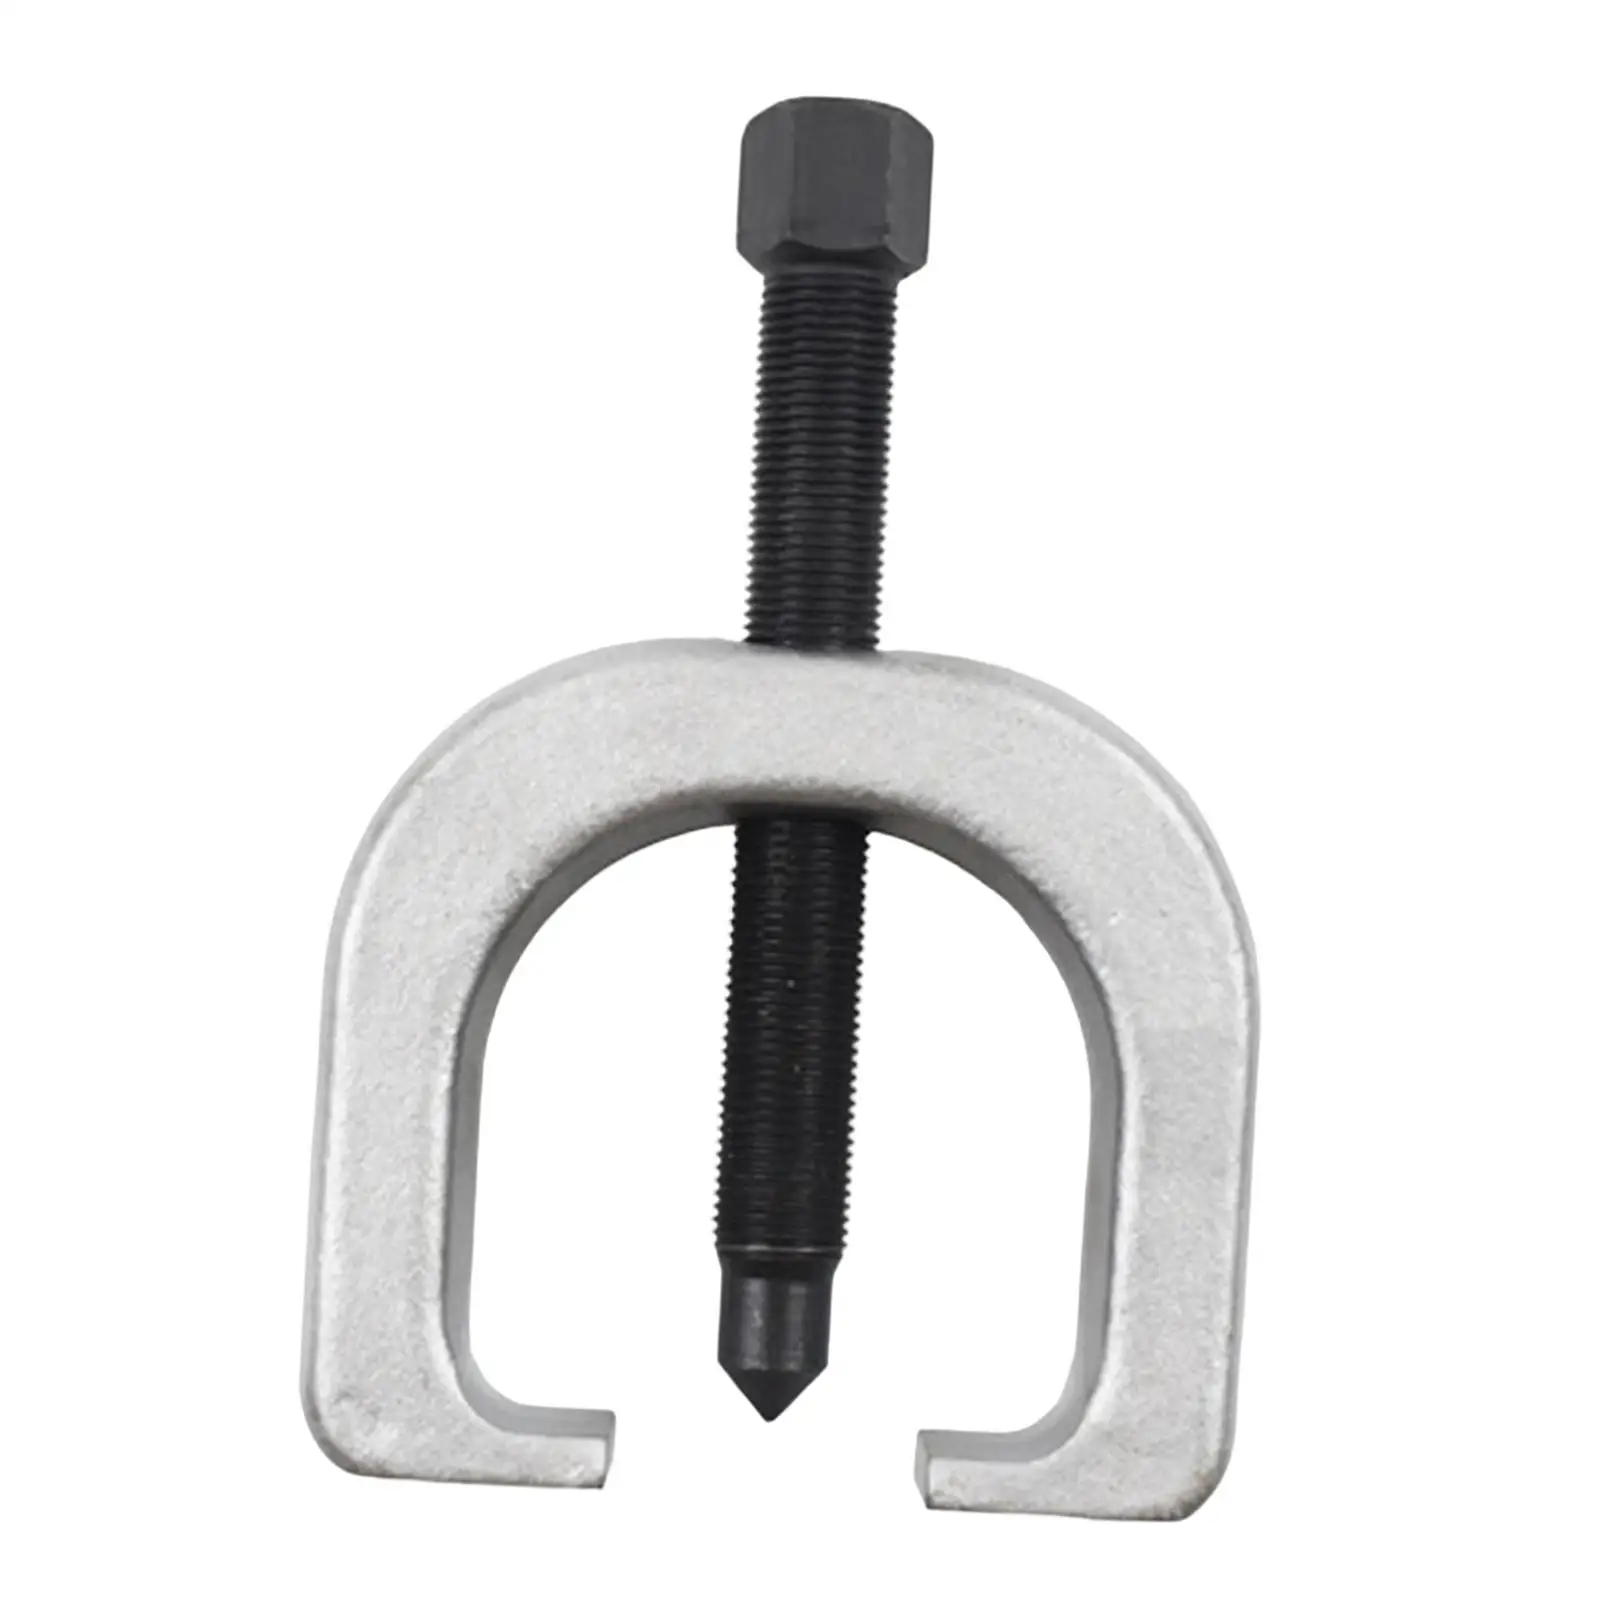 Slack Adjuster Puller Carbon Steel Compact High Performance Removal Tool Repair Tool Maintenance Tool for Trailers Trucks